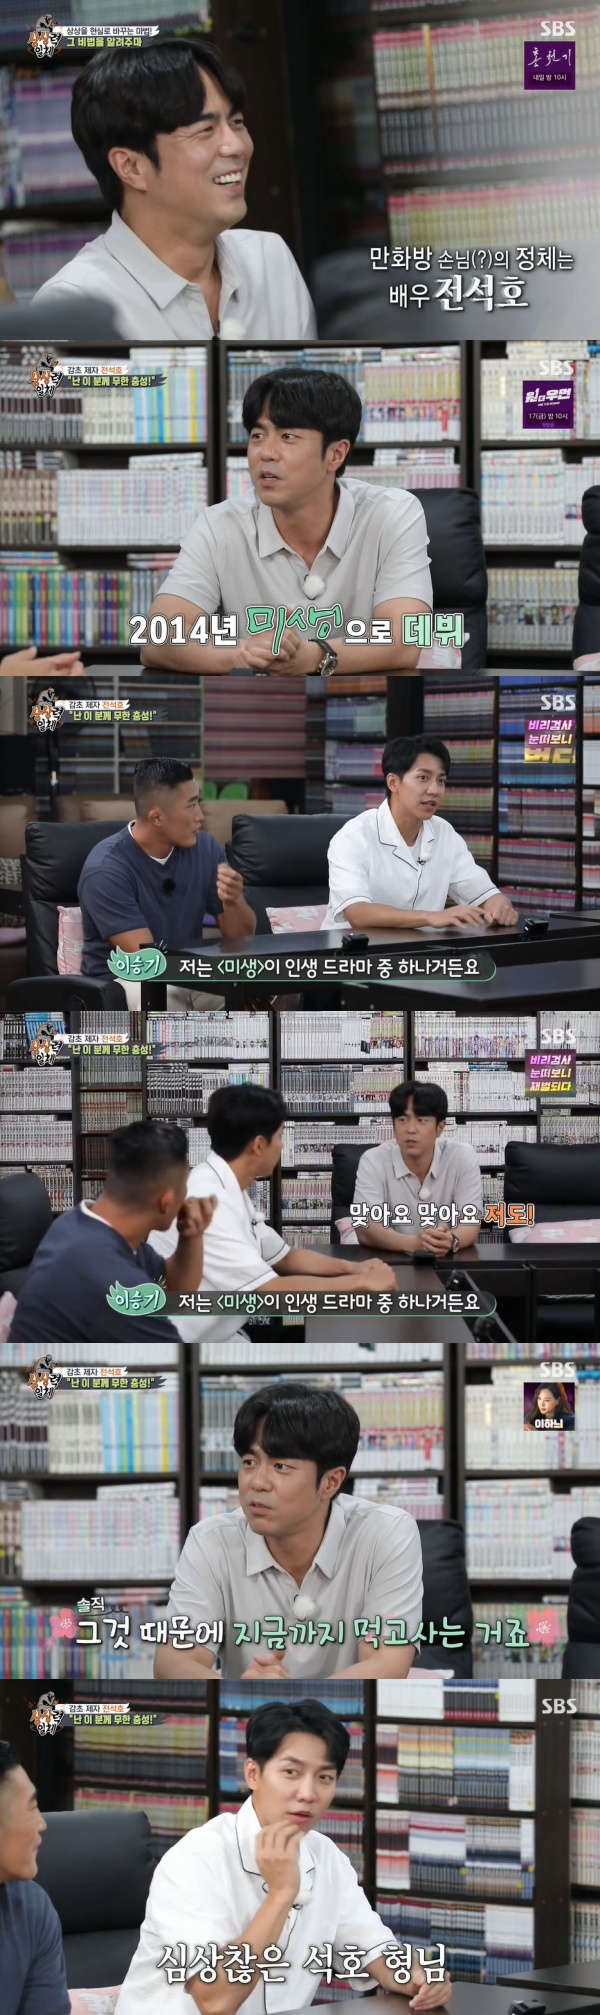 On the SBS entertainment program All The Butlers, which was broadcast on the 5th, Lee Seung-gi, who welcomed the Seaok-Ho Jeon, who appeared as a daily student, was portrayed.Actor Seak-Ho Jeon appeared to introduce MasterI am not a master, he said. I have a relationship with the master and I applied for a daily disciple.I made my debut as Misaeng in 2014 while playing, Seok-Ho Jeon revealed, while Lee Seung-gi confessed that Im one of the Dramas of Life.So, Seak-Ho Jeon said, I am myself. Thanks to that work, I live and eat.Meanwhile, All The Butlers is a life tutoring entertainment program with youths full of question marks and myway geek masters.It airs every Sunday at 6:25 p.m.Photo SBS broadcast screen capture